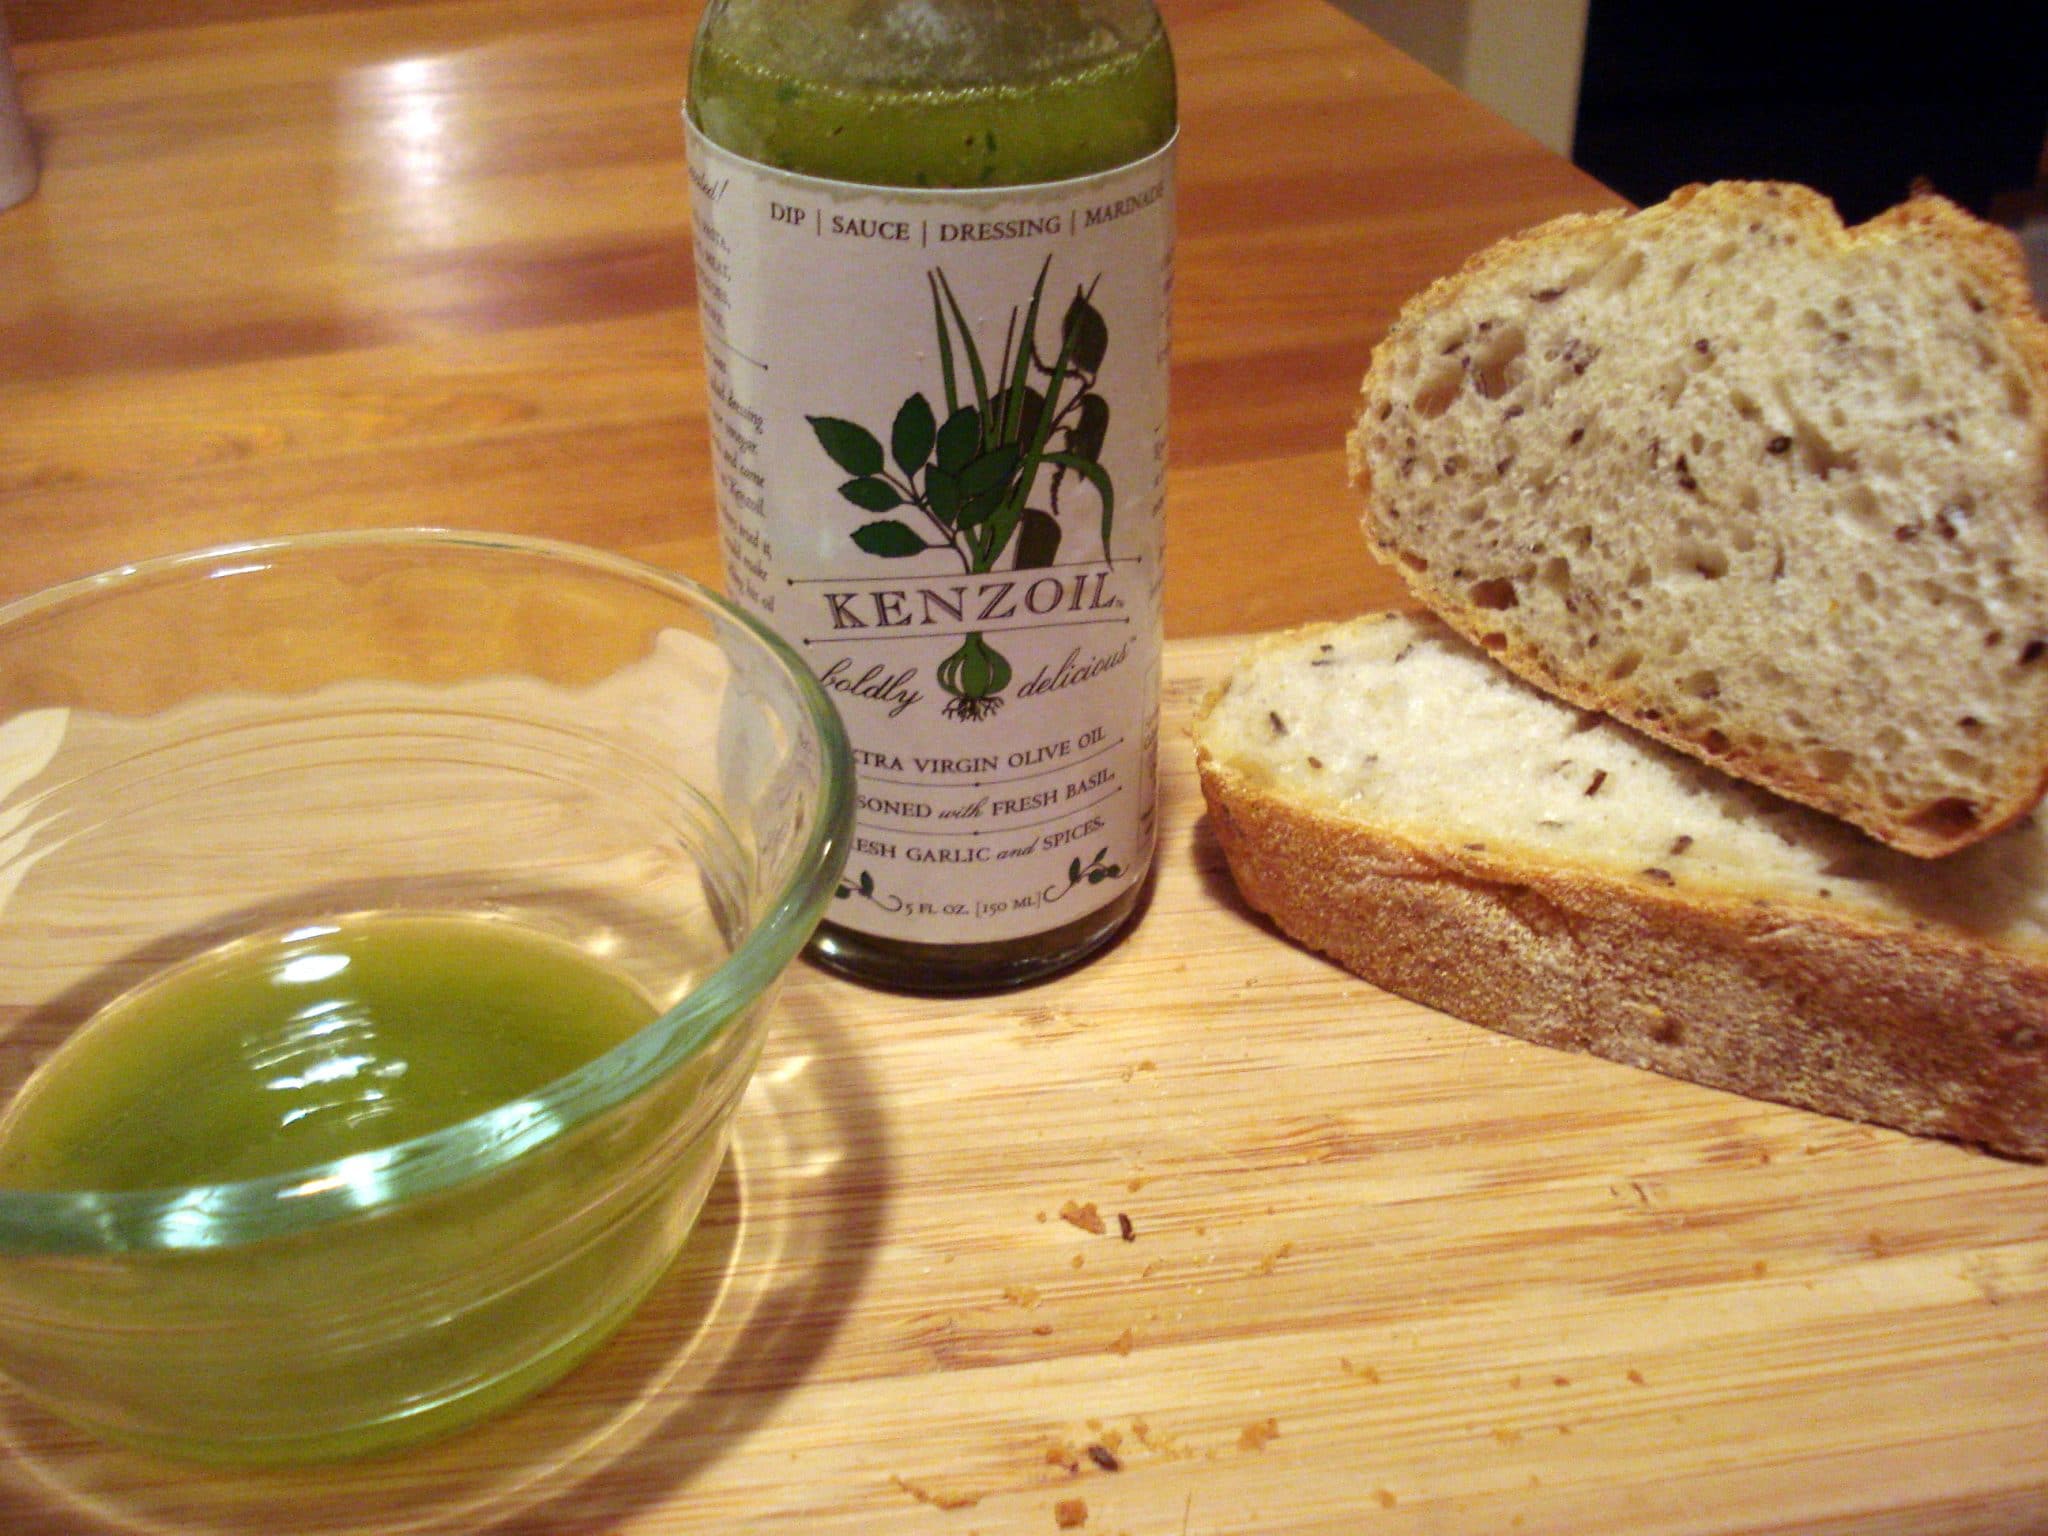 Green kenzoil and bread